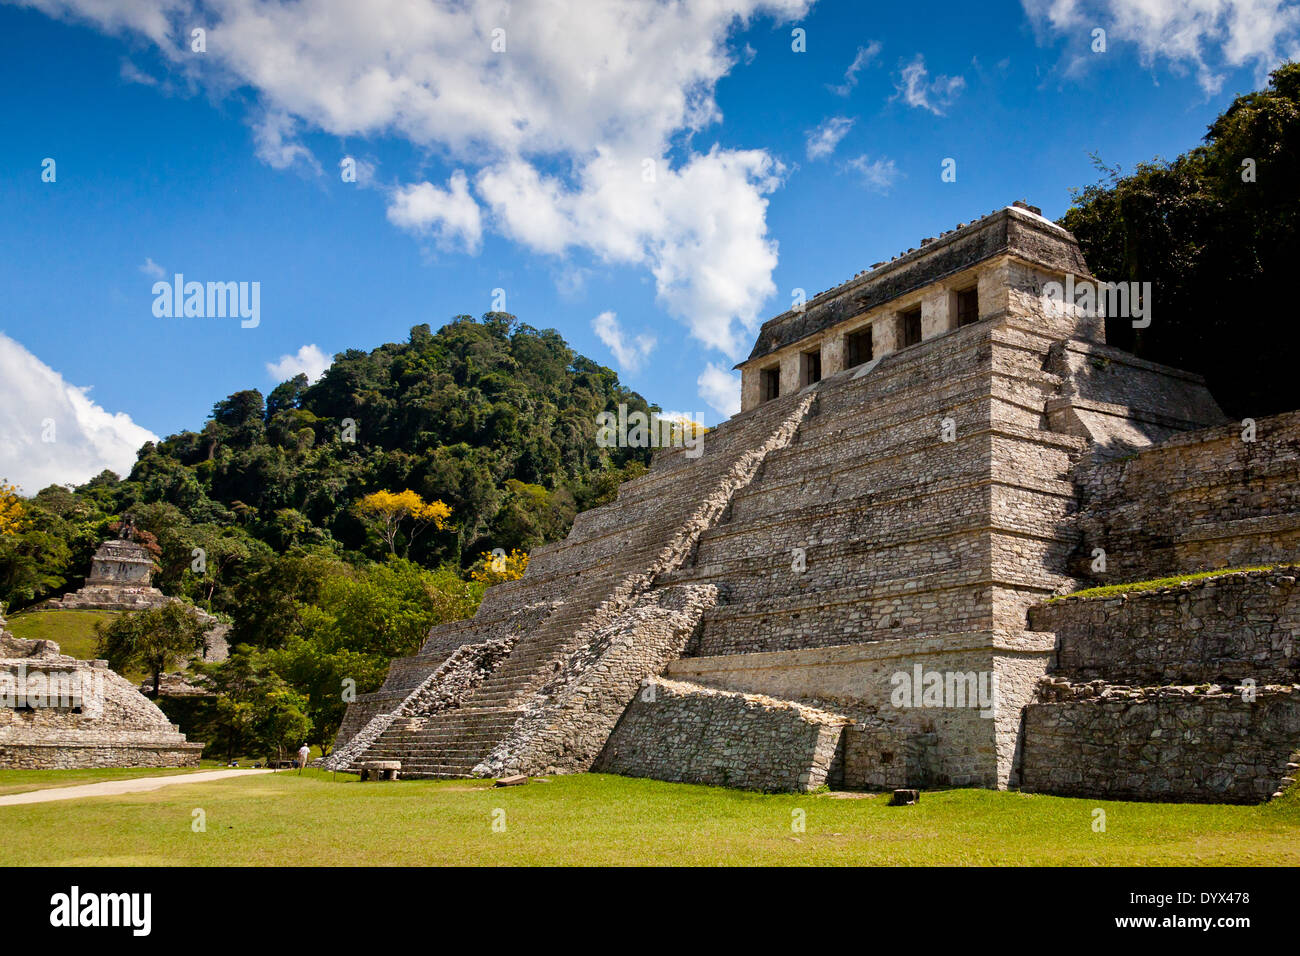 Temple of Palenque, an ancient mayan ruin, located in Palenque, Yucatan, Mexico Stock Photo